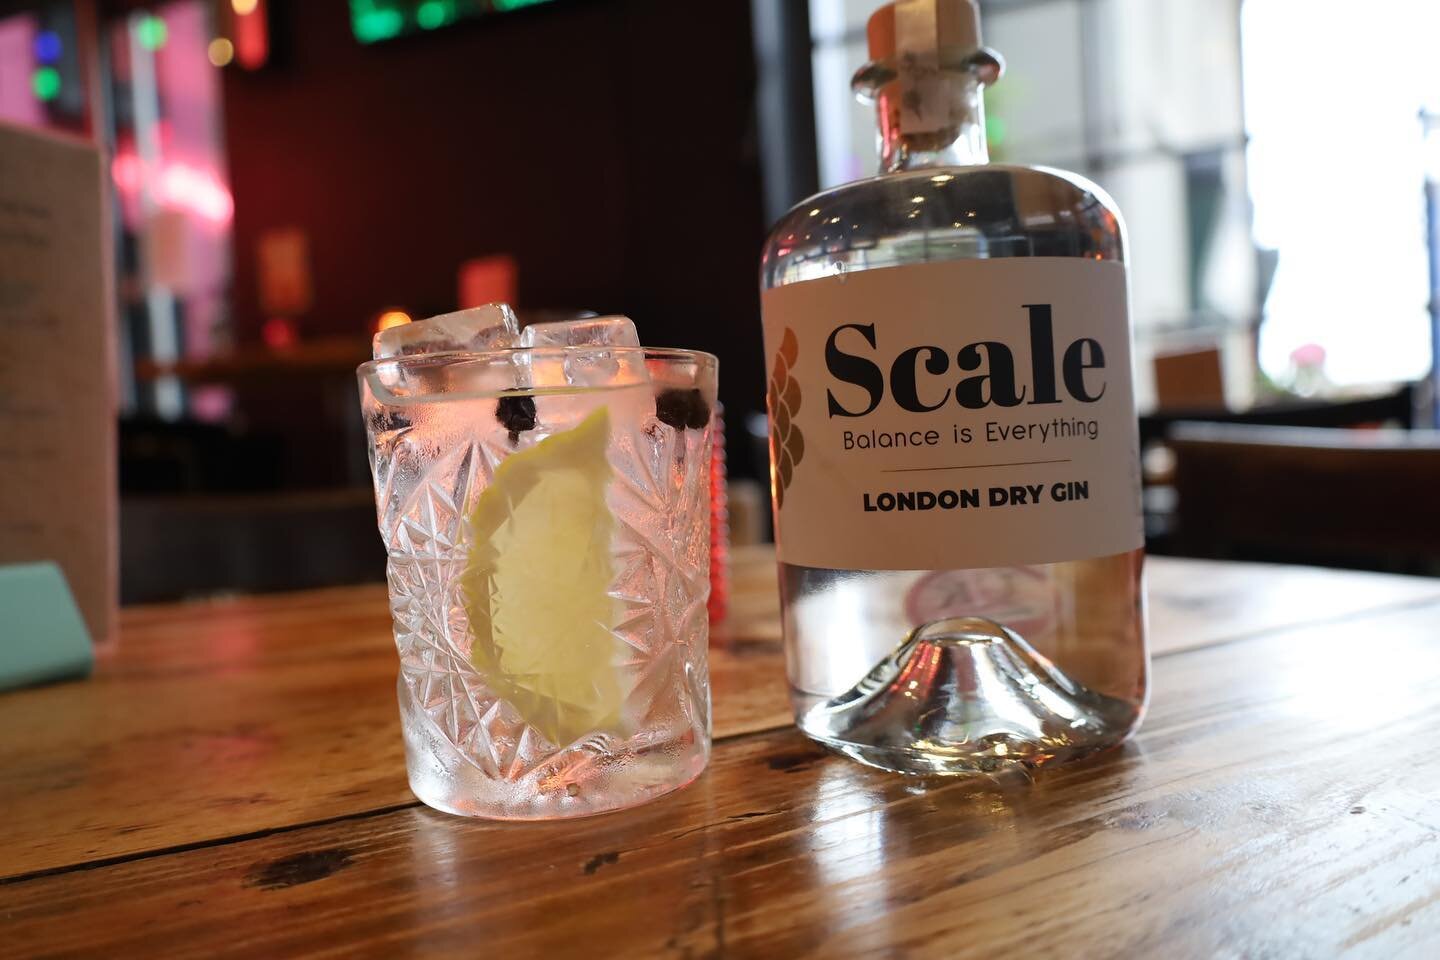 Meet our new house gin!

Very excited to be working with the team @scale_gin !

We know your going to love it as much as we do!

#kentwedding #kent #kentweddings #kentmobilebar #mobilebartender #barhire #weddingbar #wedding  #henparty #cocktailsofins